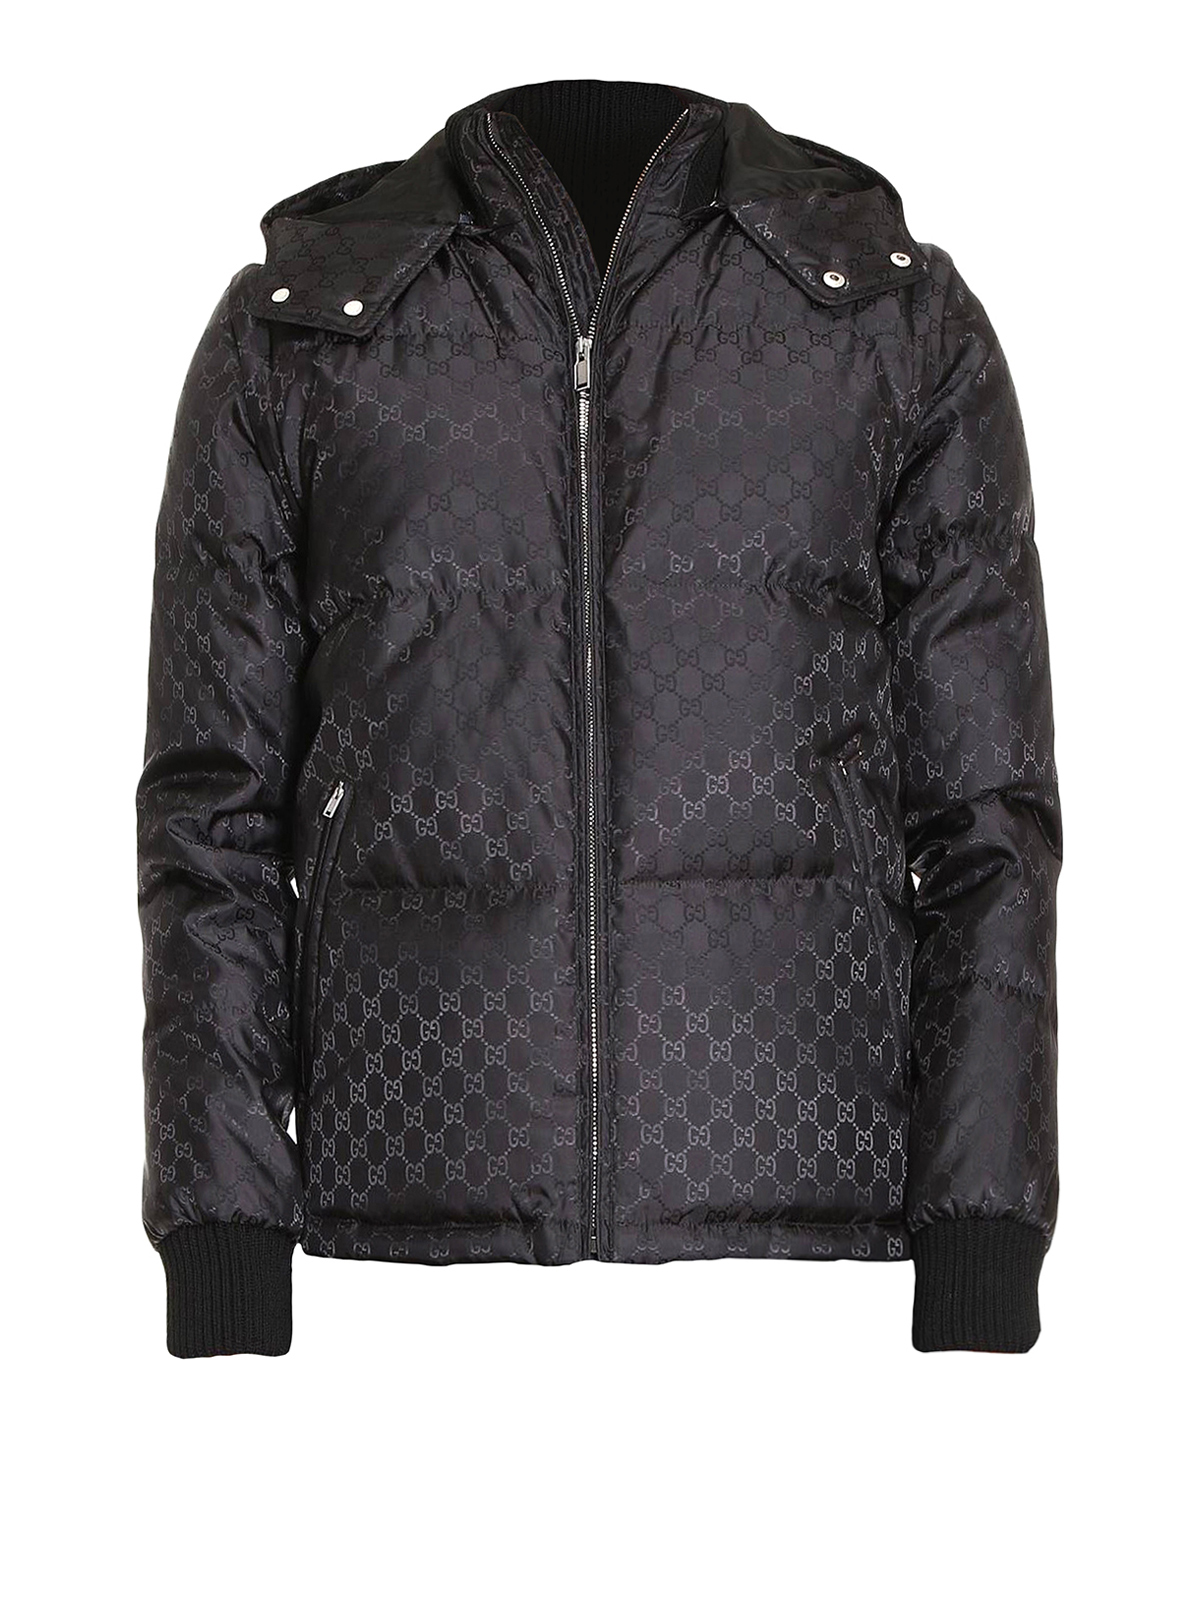 Gucci Puffer Jackets for Women, Padded Jackets